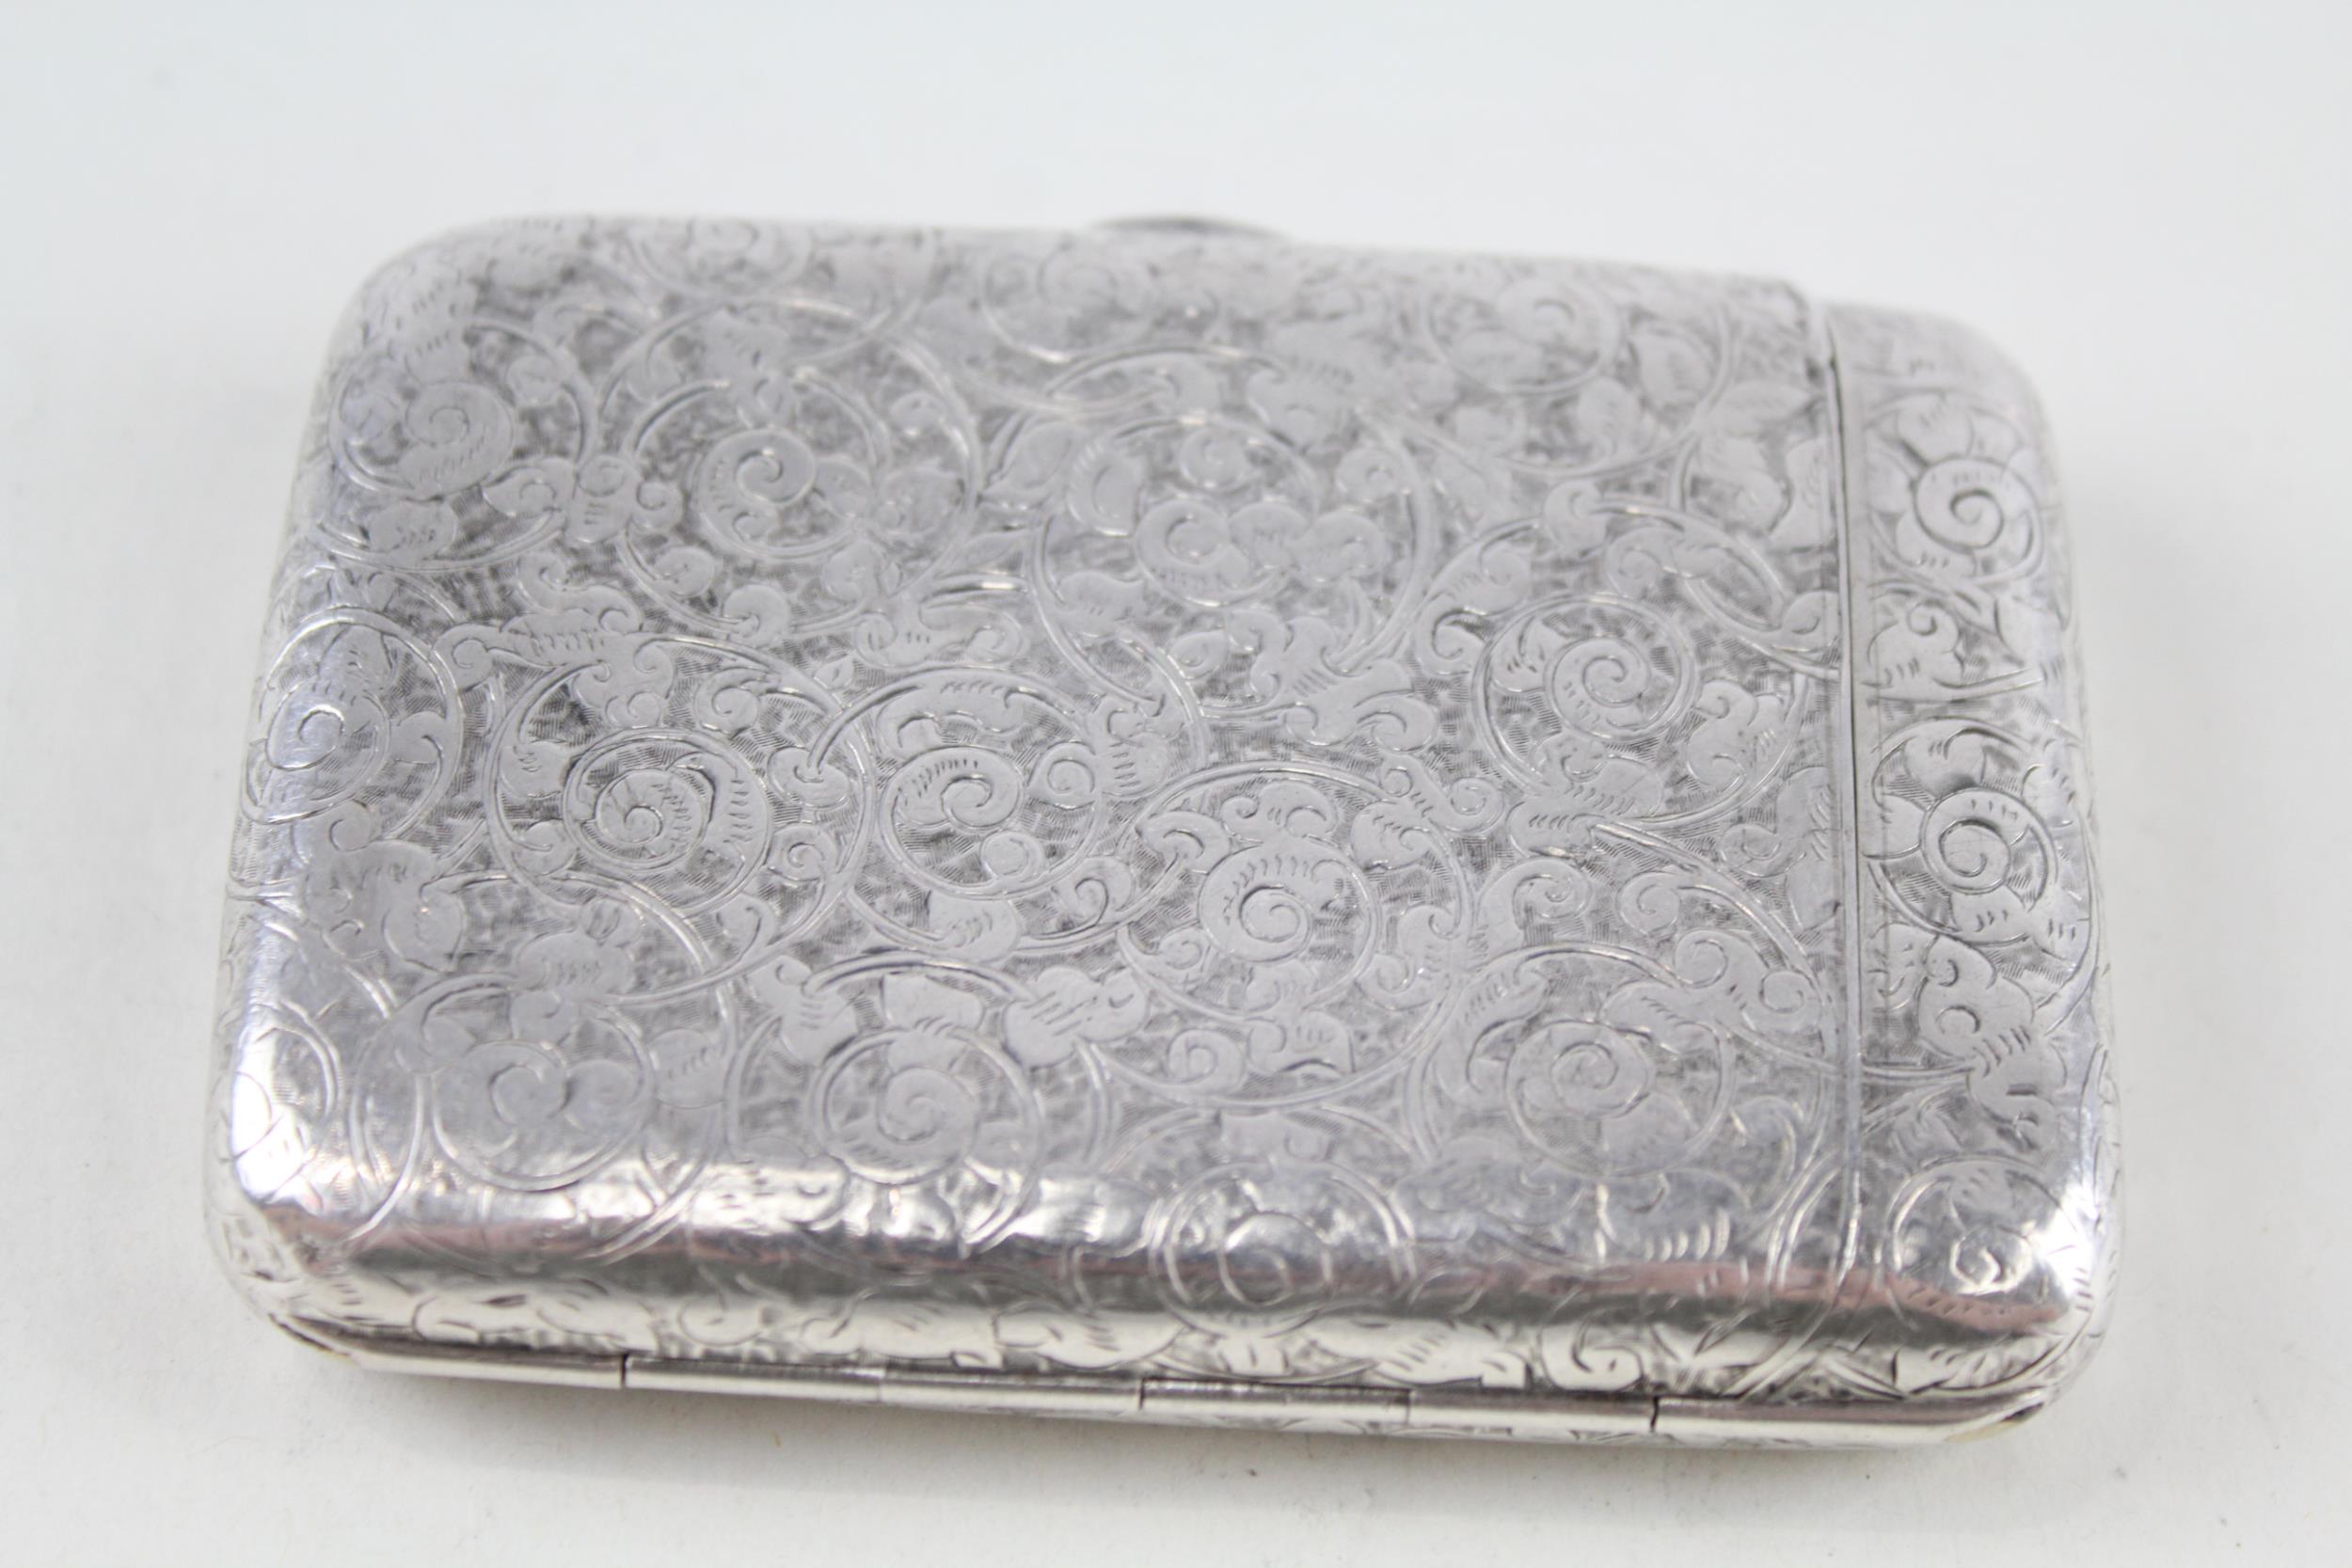 Antique Victorian HM 1887 Birmingham Sterling Silver Cigarette Case (85g) - w/ Personal Engraving - Image 4 of 5